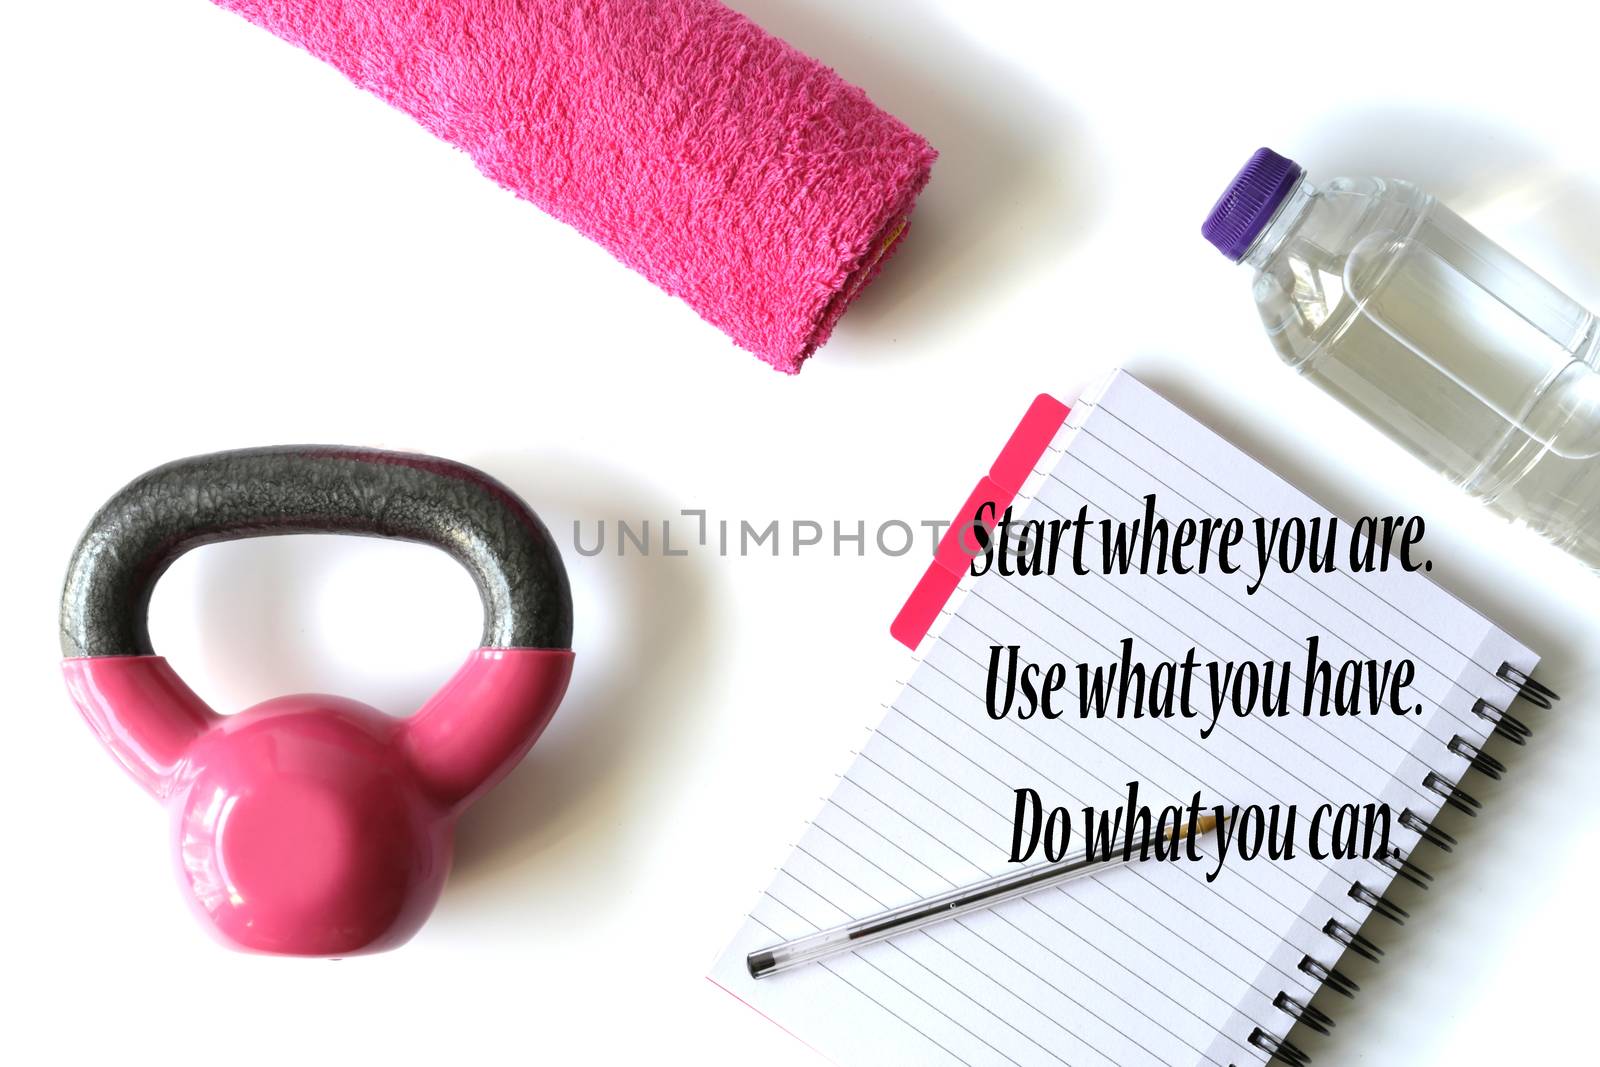 Healthy life style pink accessories on white background with sign Start where you are, Use what you have. Do what you can. Getting ready for weight loss. New Start fitness new year resolution